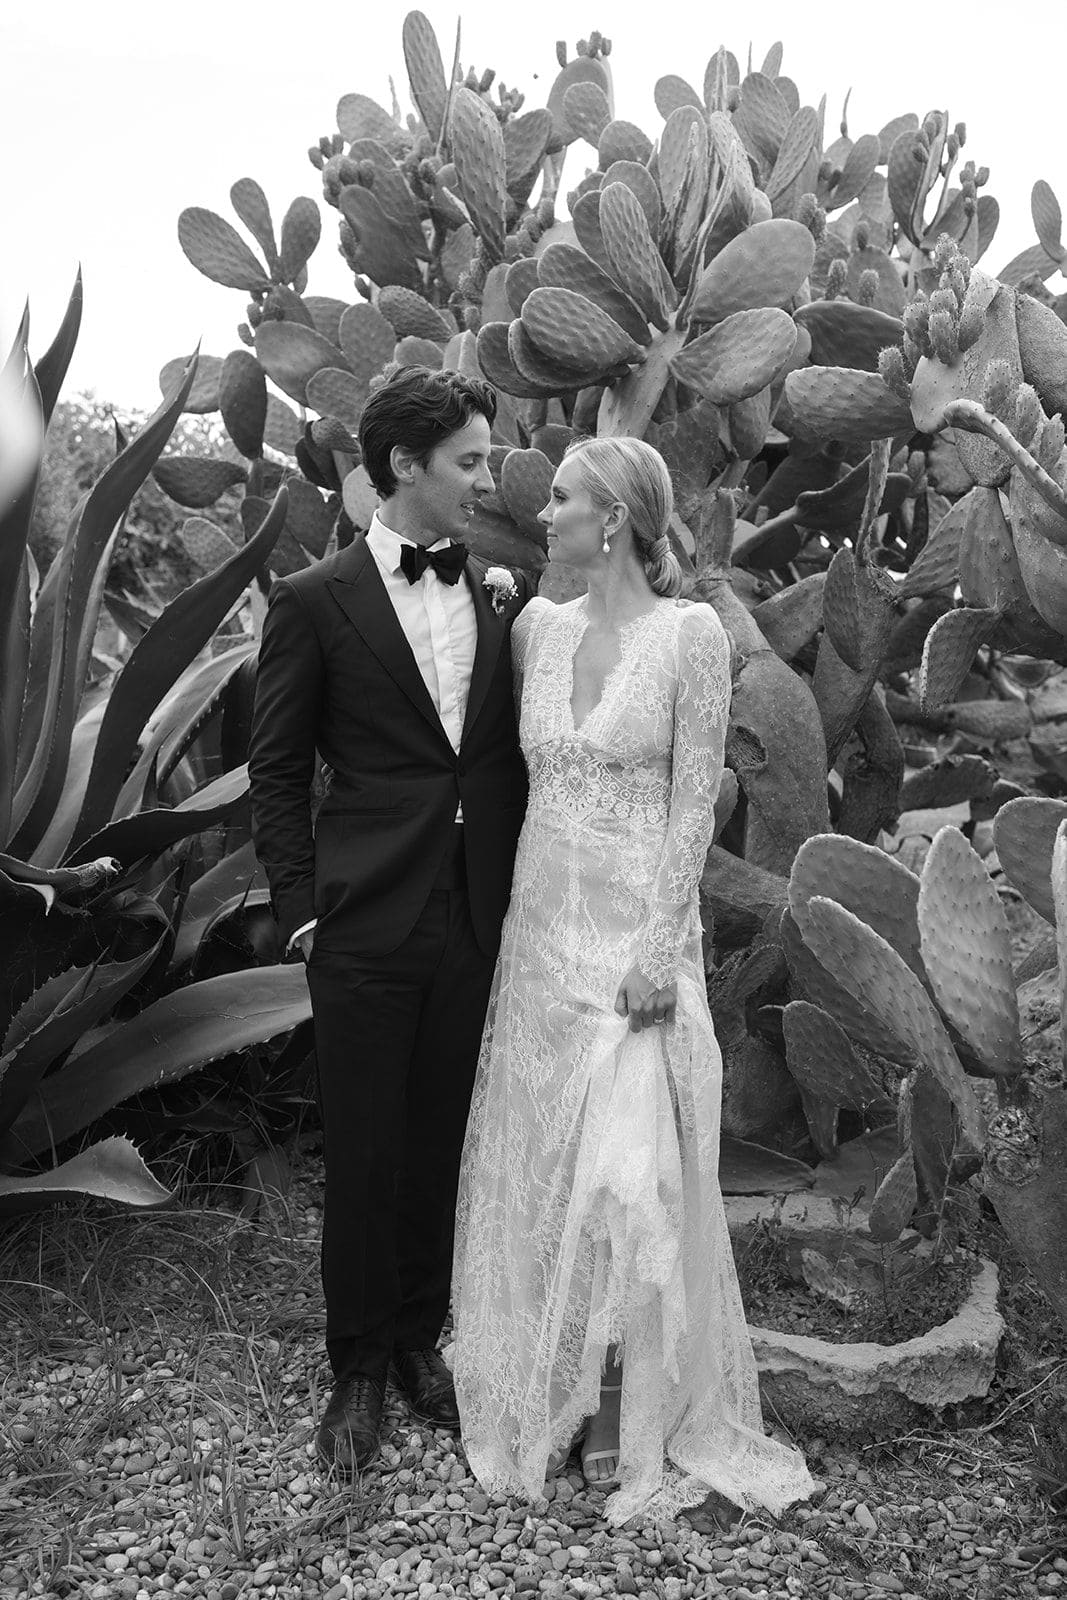 Bride and groom black and white portrait among cactus in Puglia Italy destination wedding